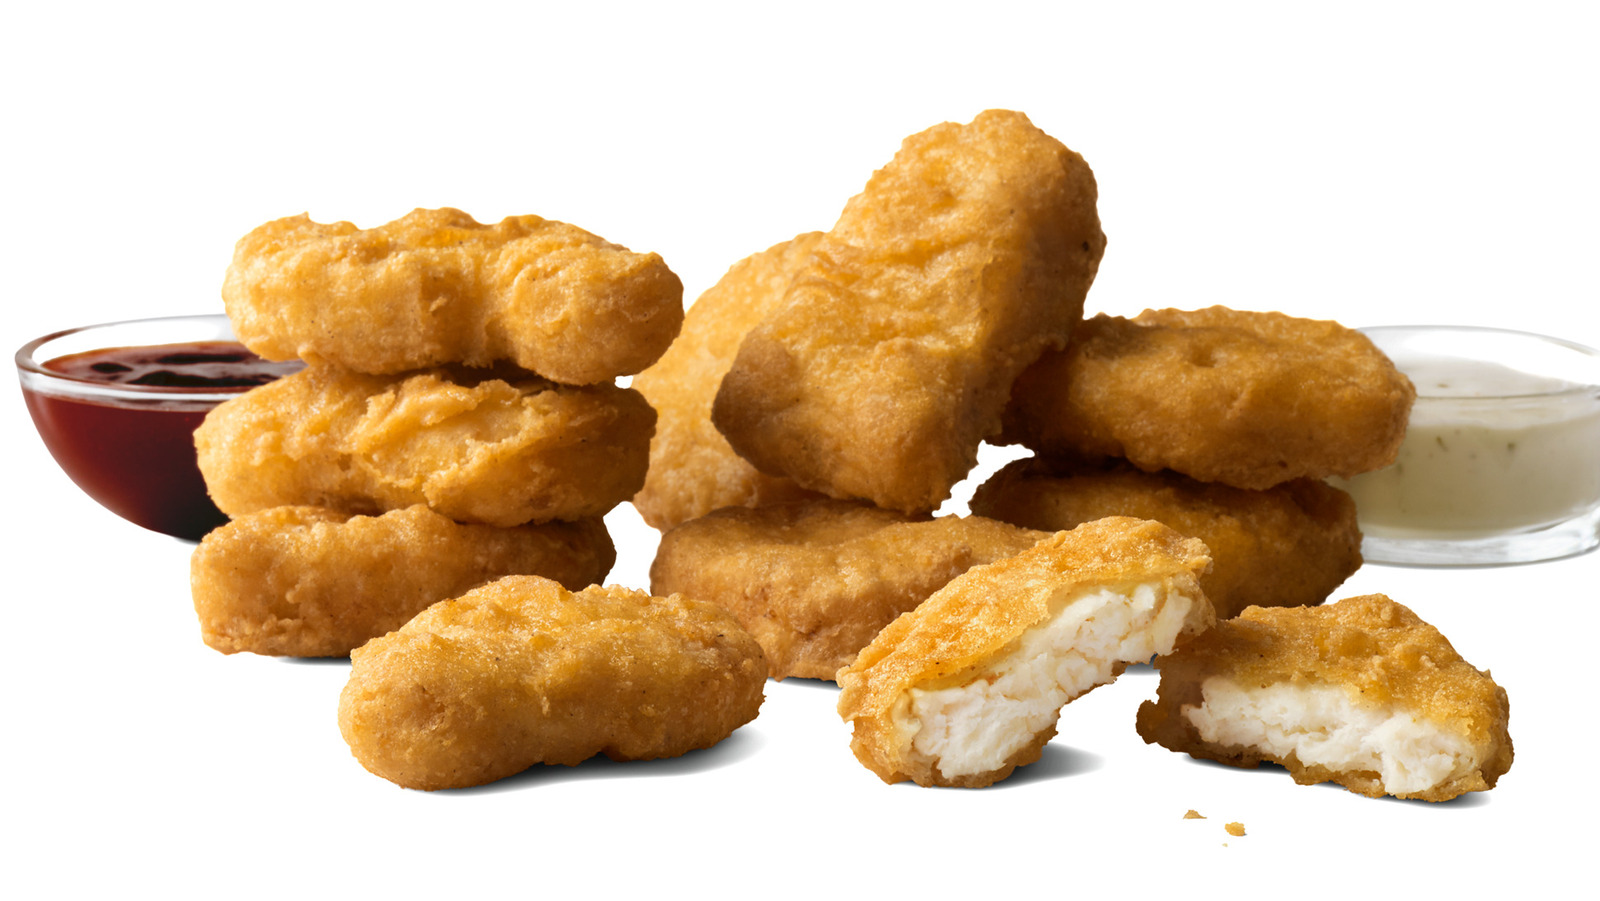 40 McNugget Facts To Celebrate Their 40th Year